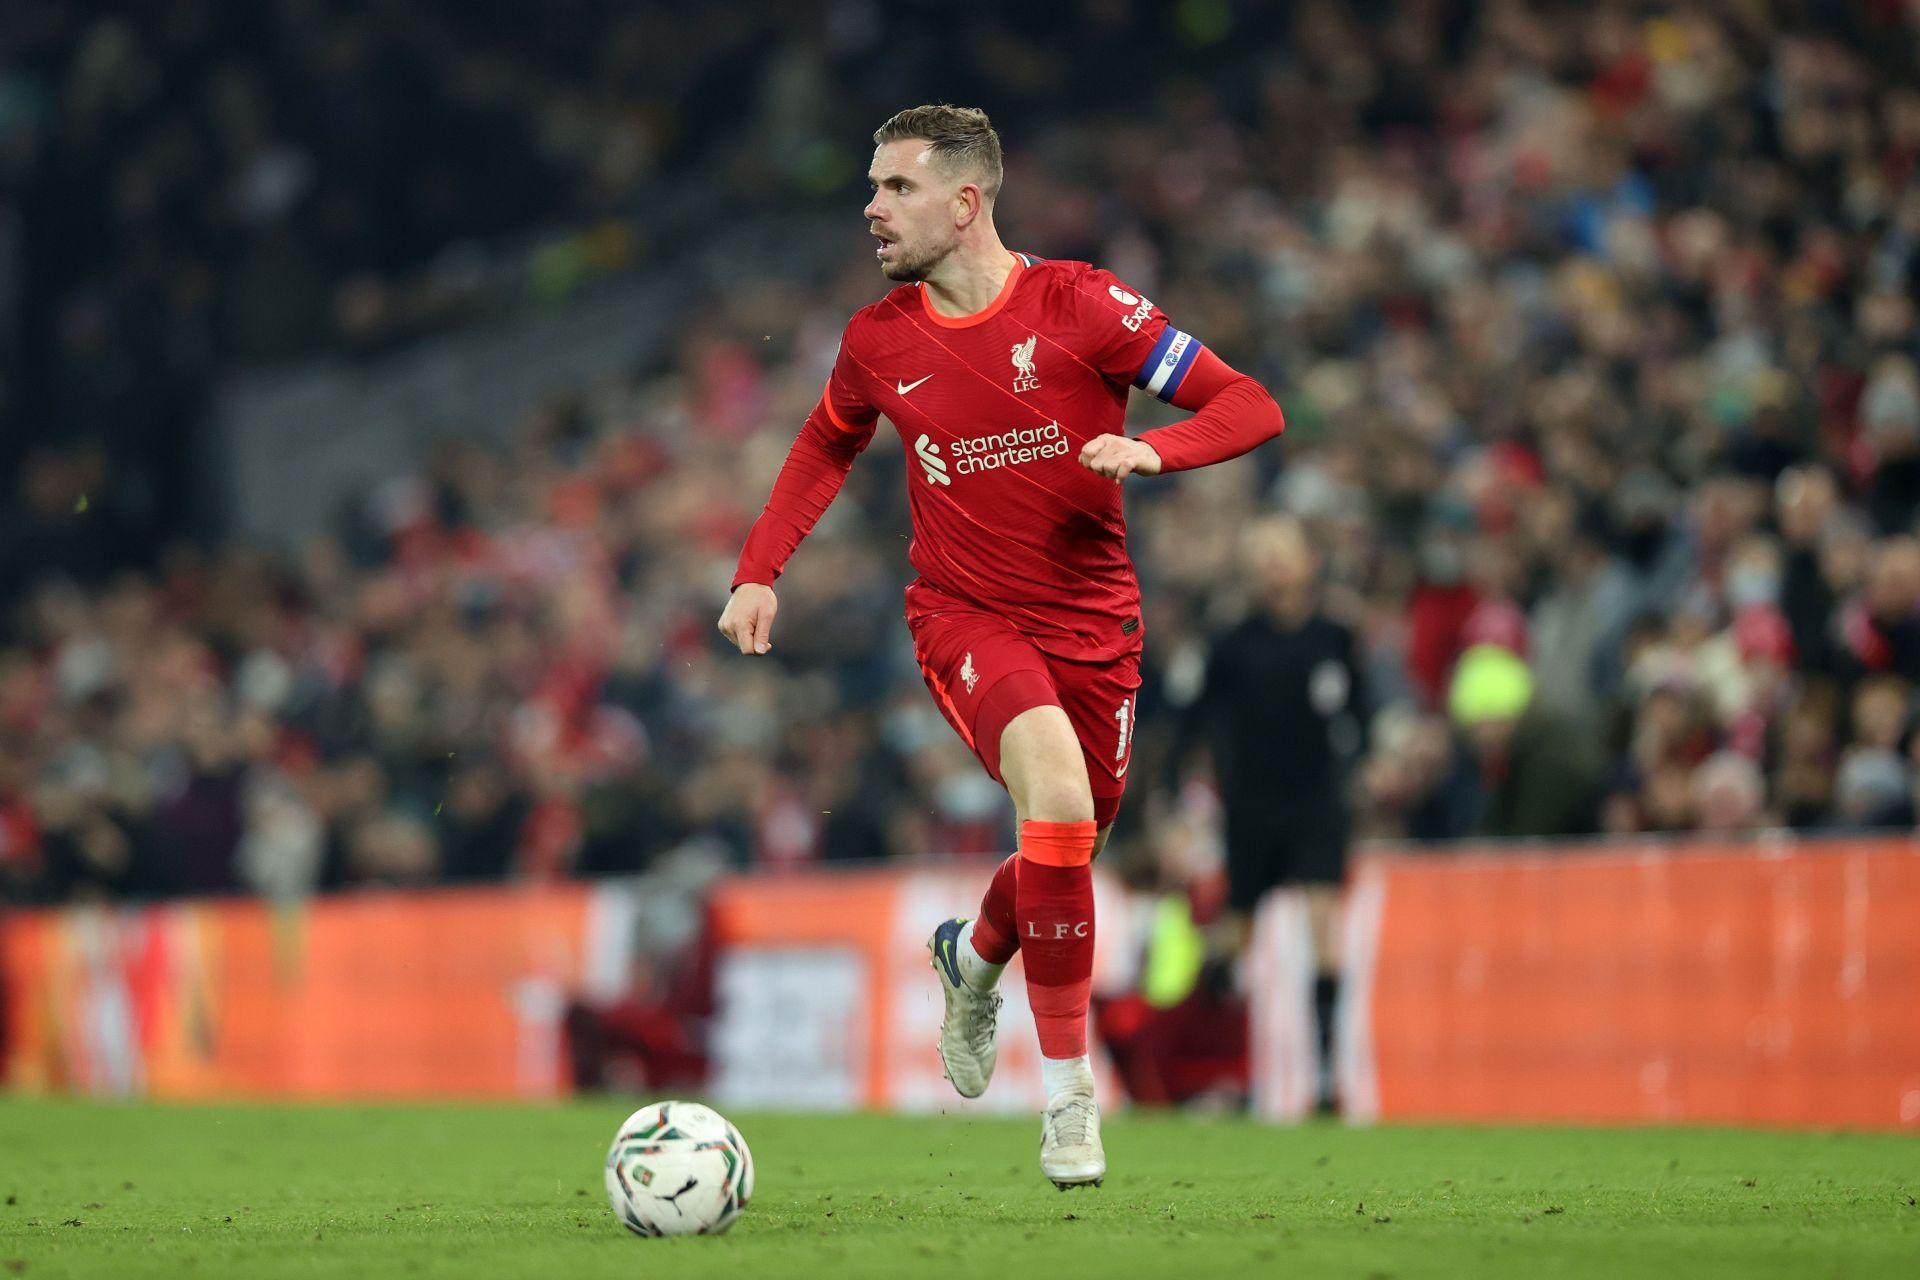 Henderson in action for the Reds